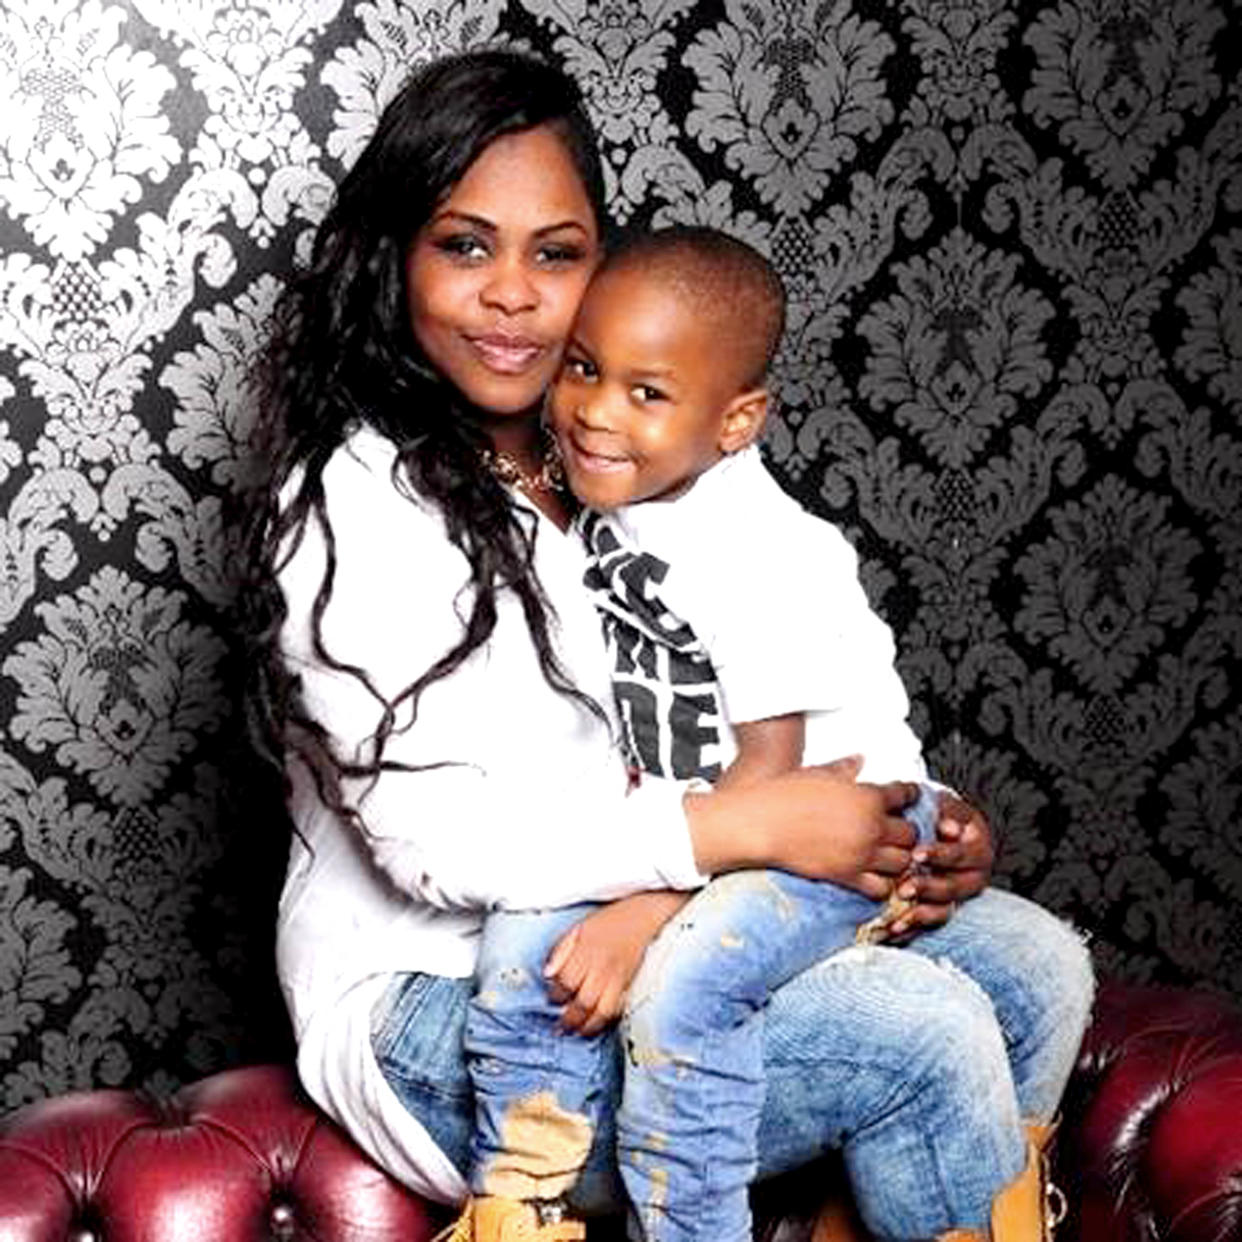 BEST QUALITY AVAILABLE Undated handout photo issued by the NHS press office of Simonne Kerr, 31, who was fatally stabbed in her home in Battersea, south west London. Desmond Sylva has at the Old Bailey admitted killing the nurse who performed on Britain's Got Talent in an NHS choir to encourage blood donations after her young son Kavele (pictured) died from complications of sickle cell disease.